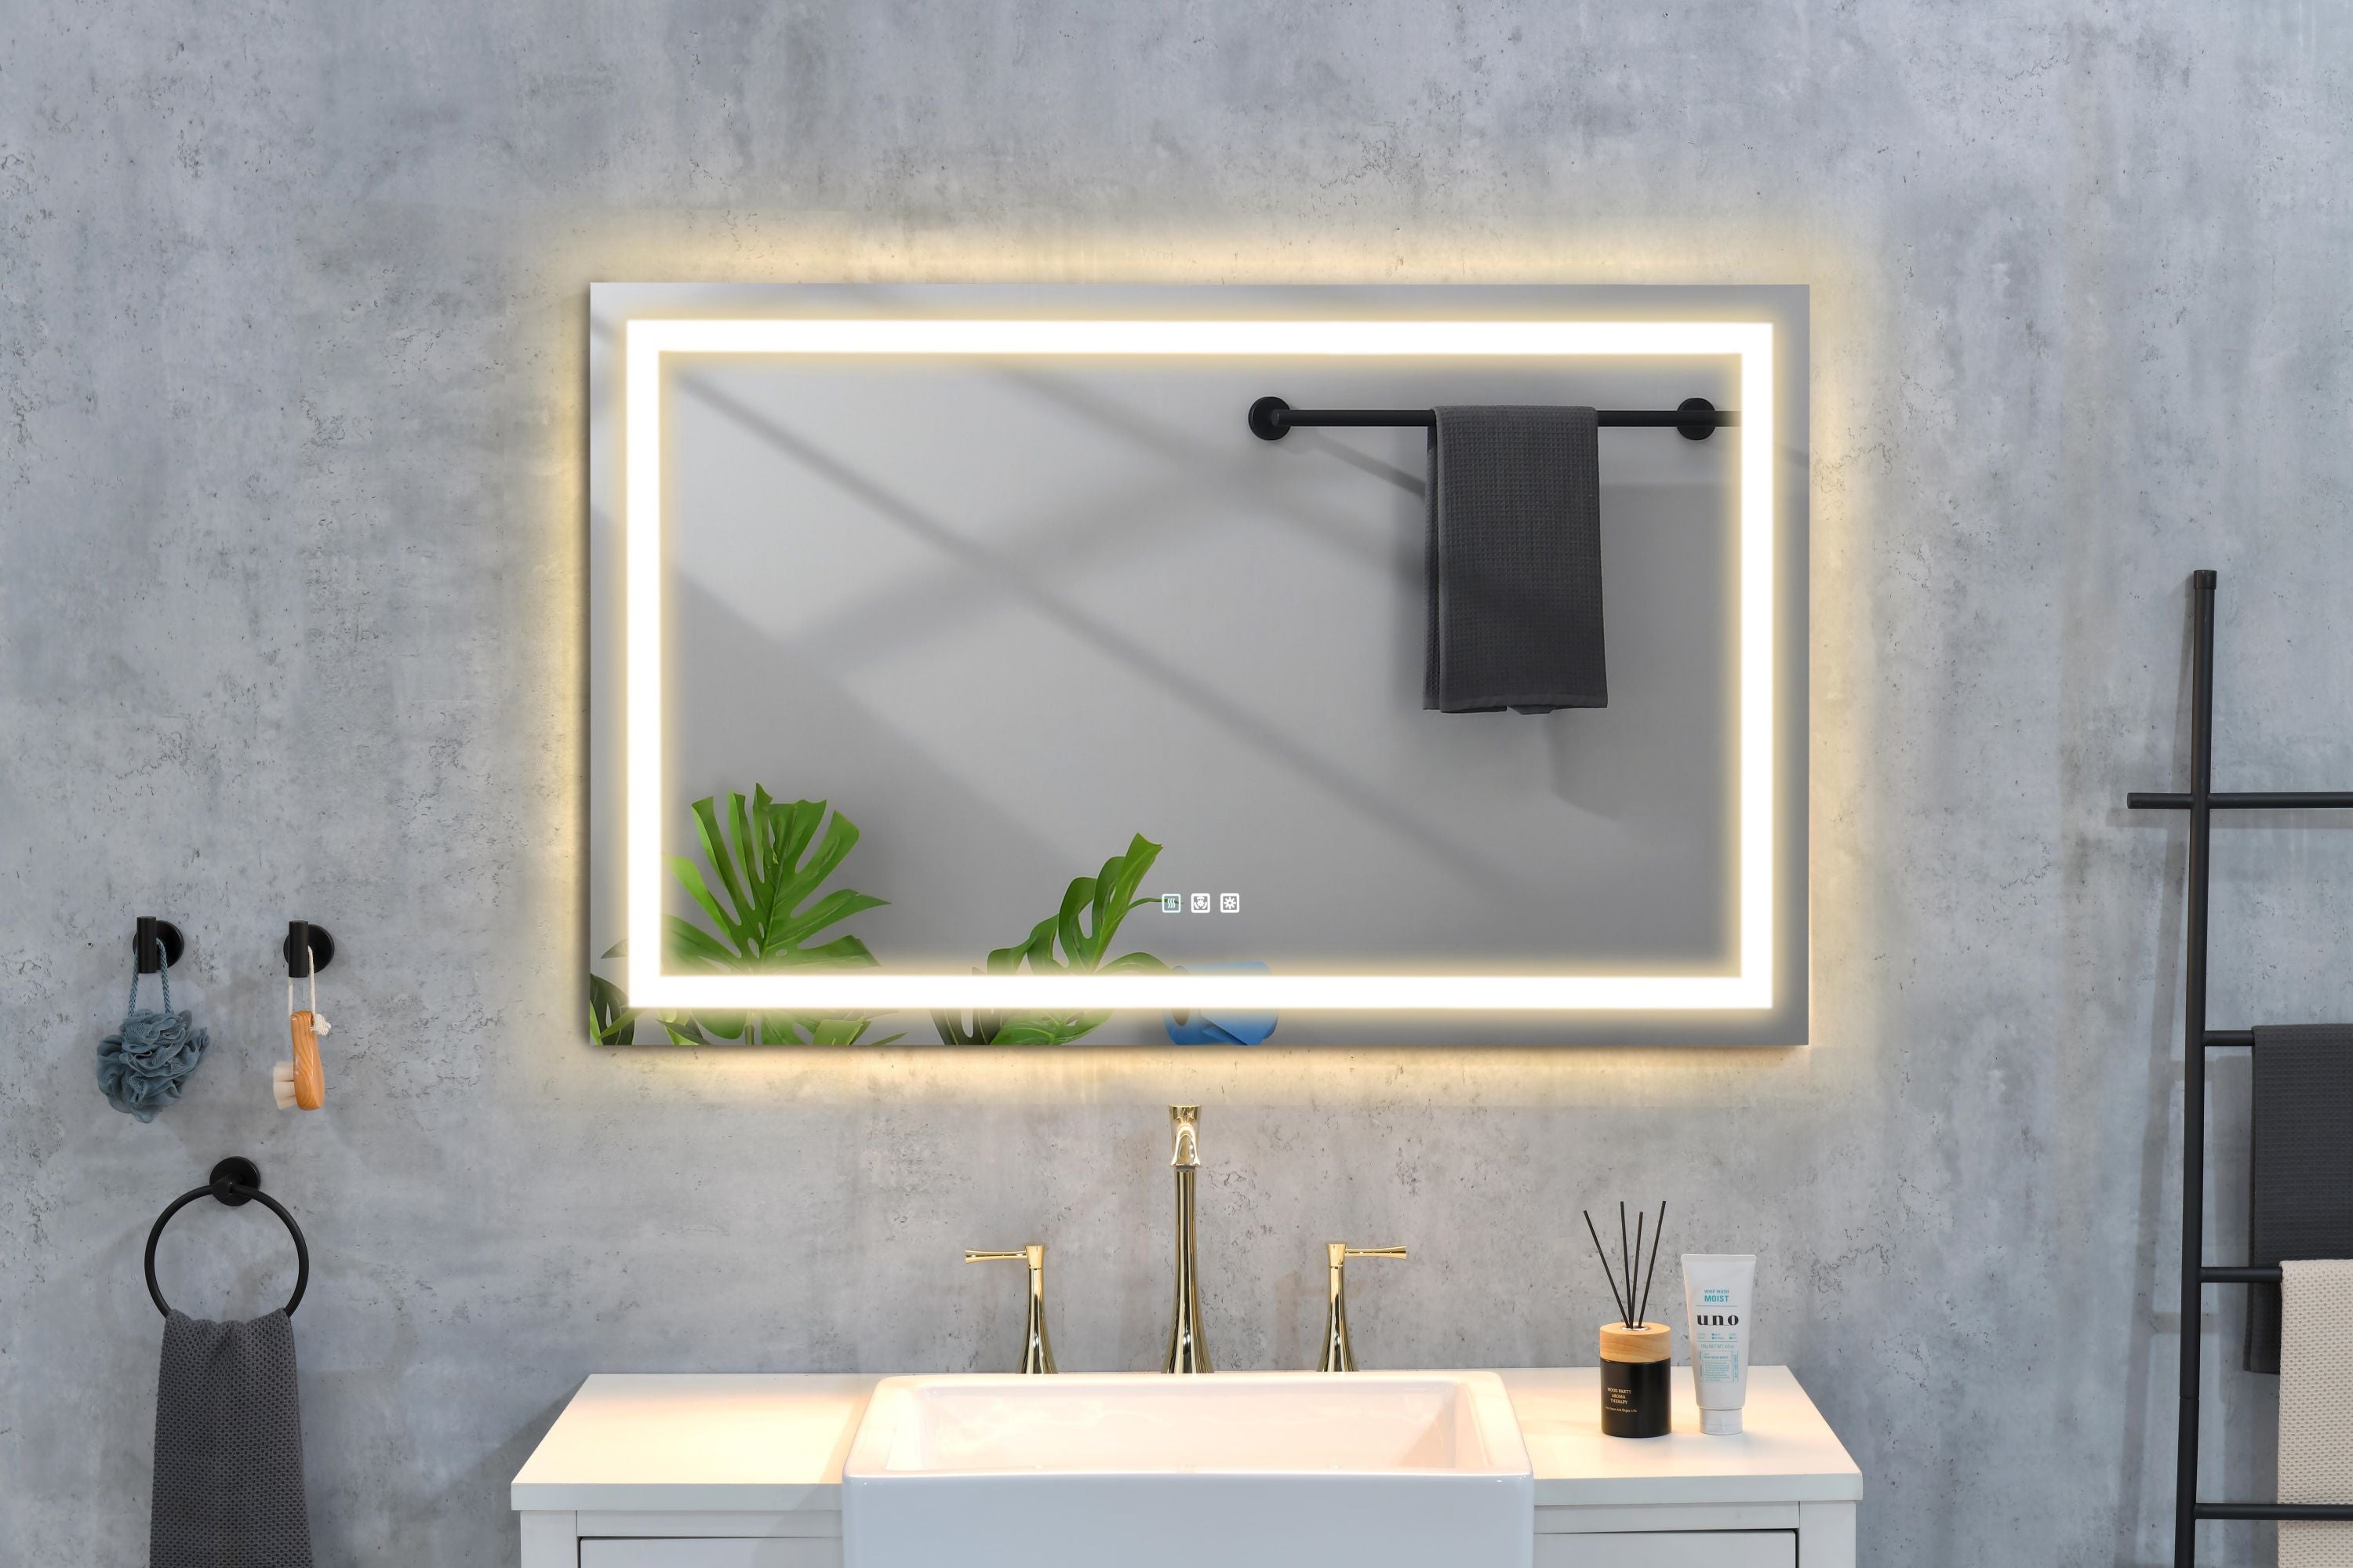 48 in. W x 36 in. H Inch Frameless LED Mirror Bathroom Vanity Mirrors with Lights